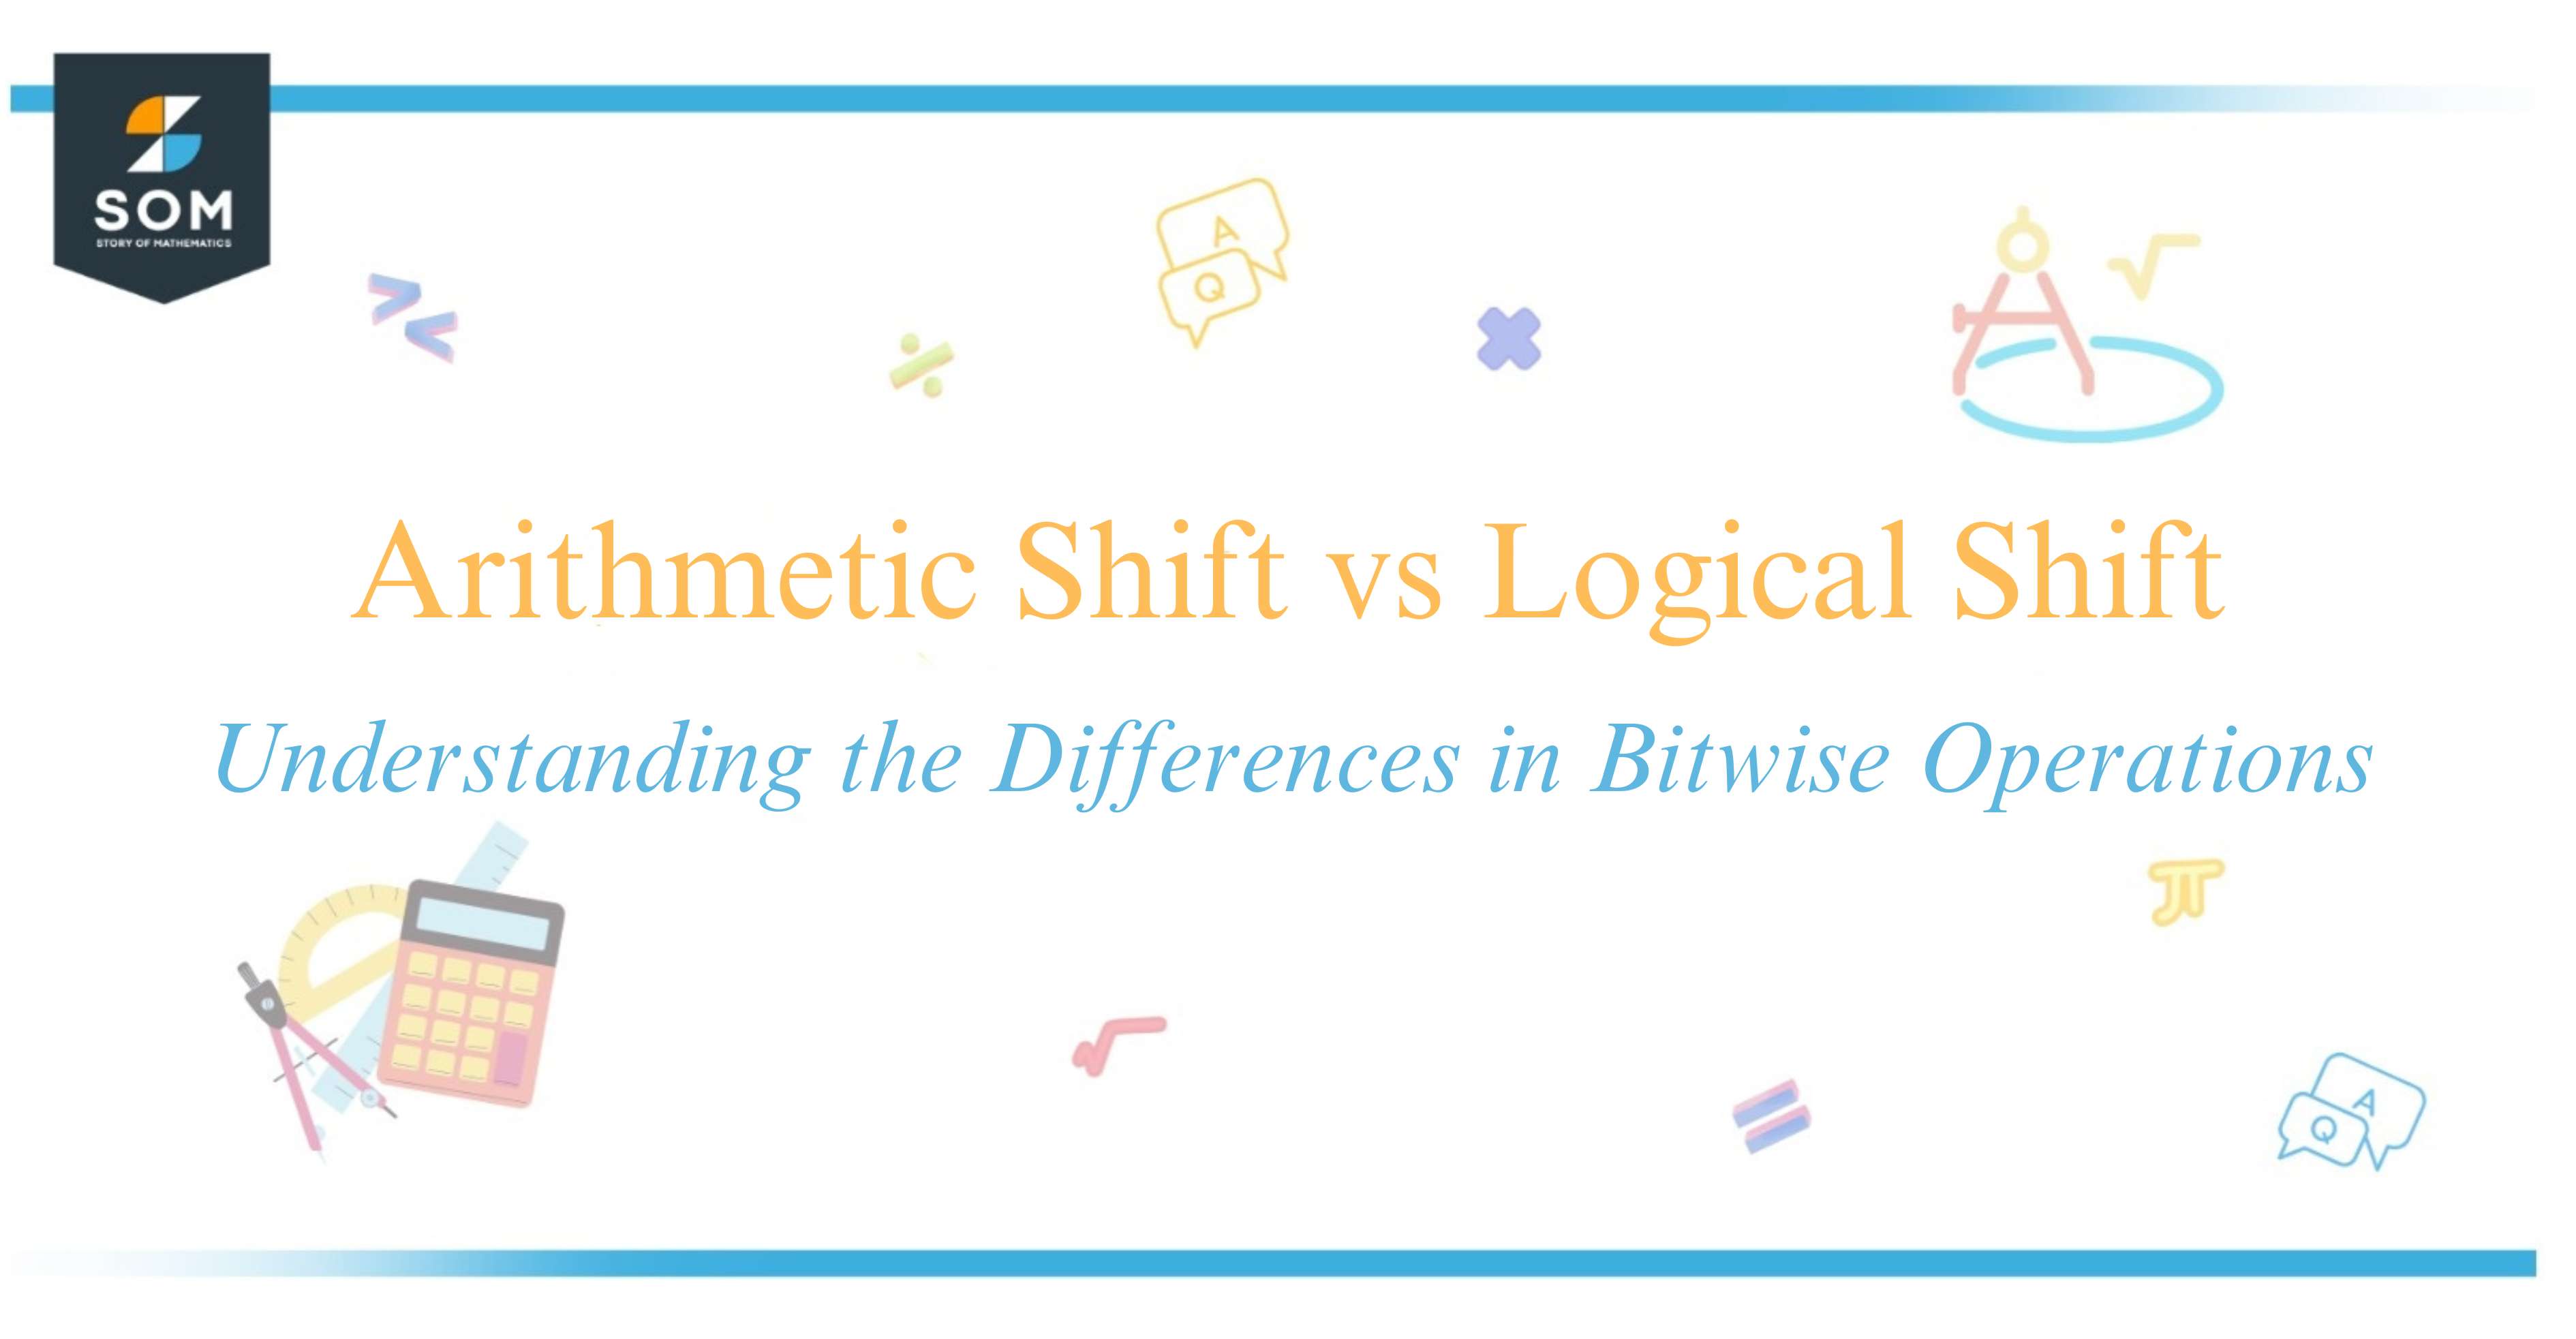 Arithmetic Shift vs Logical Shift Understanding the Differences in Bitwise Operations